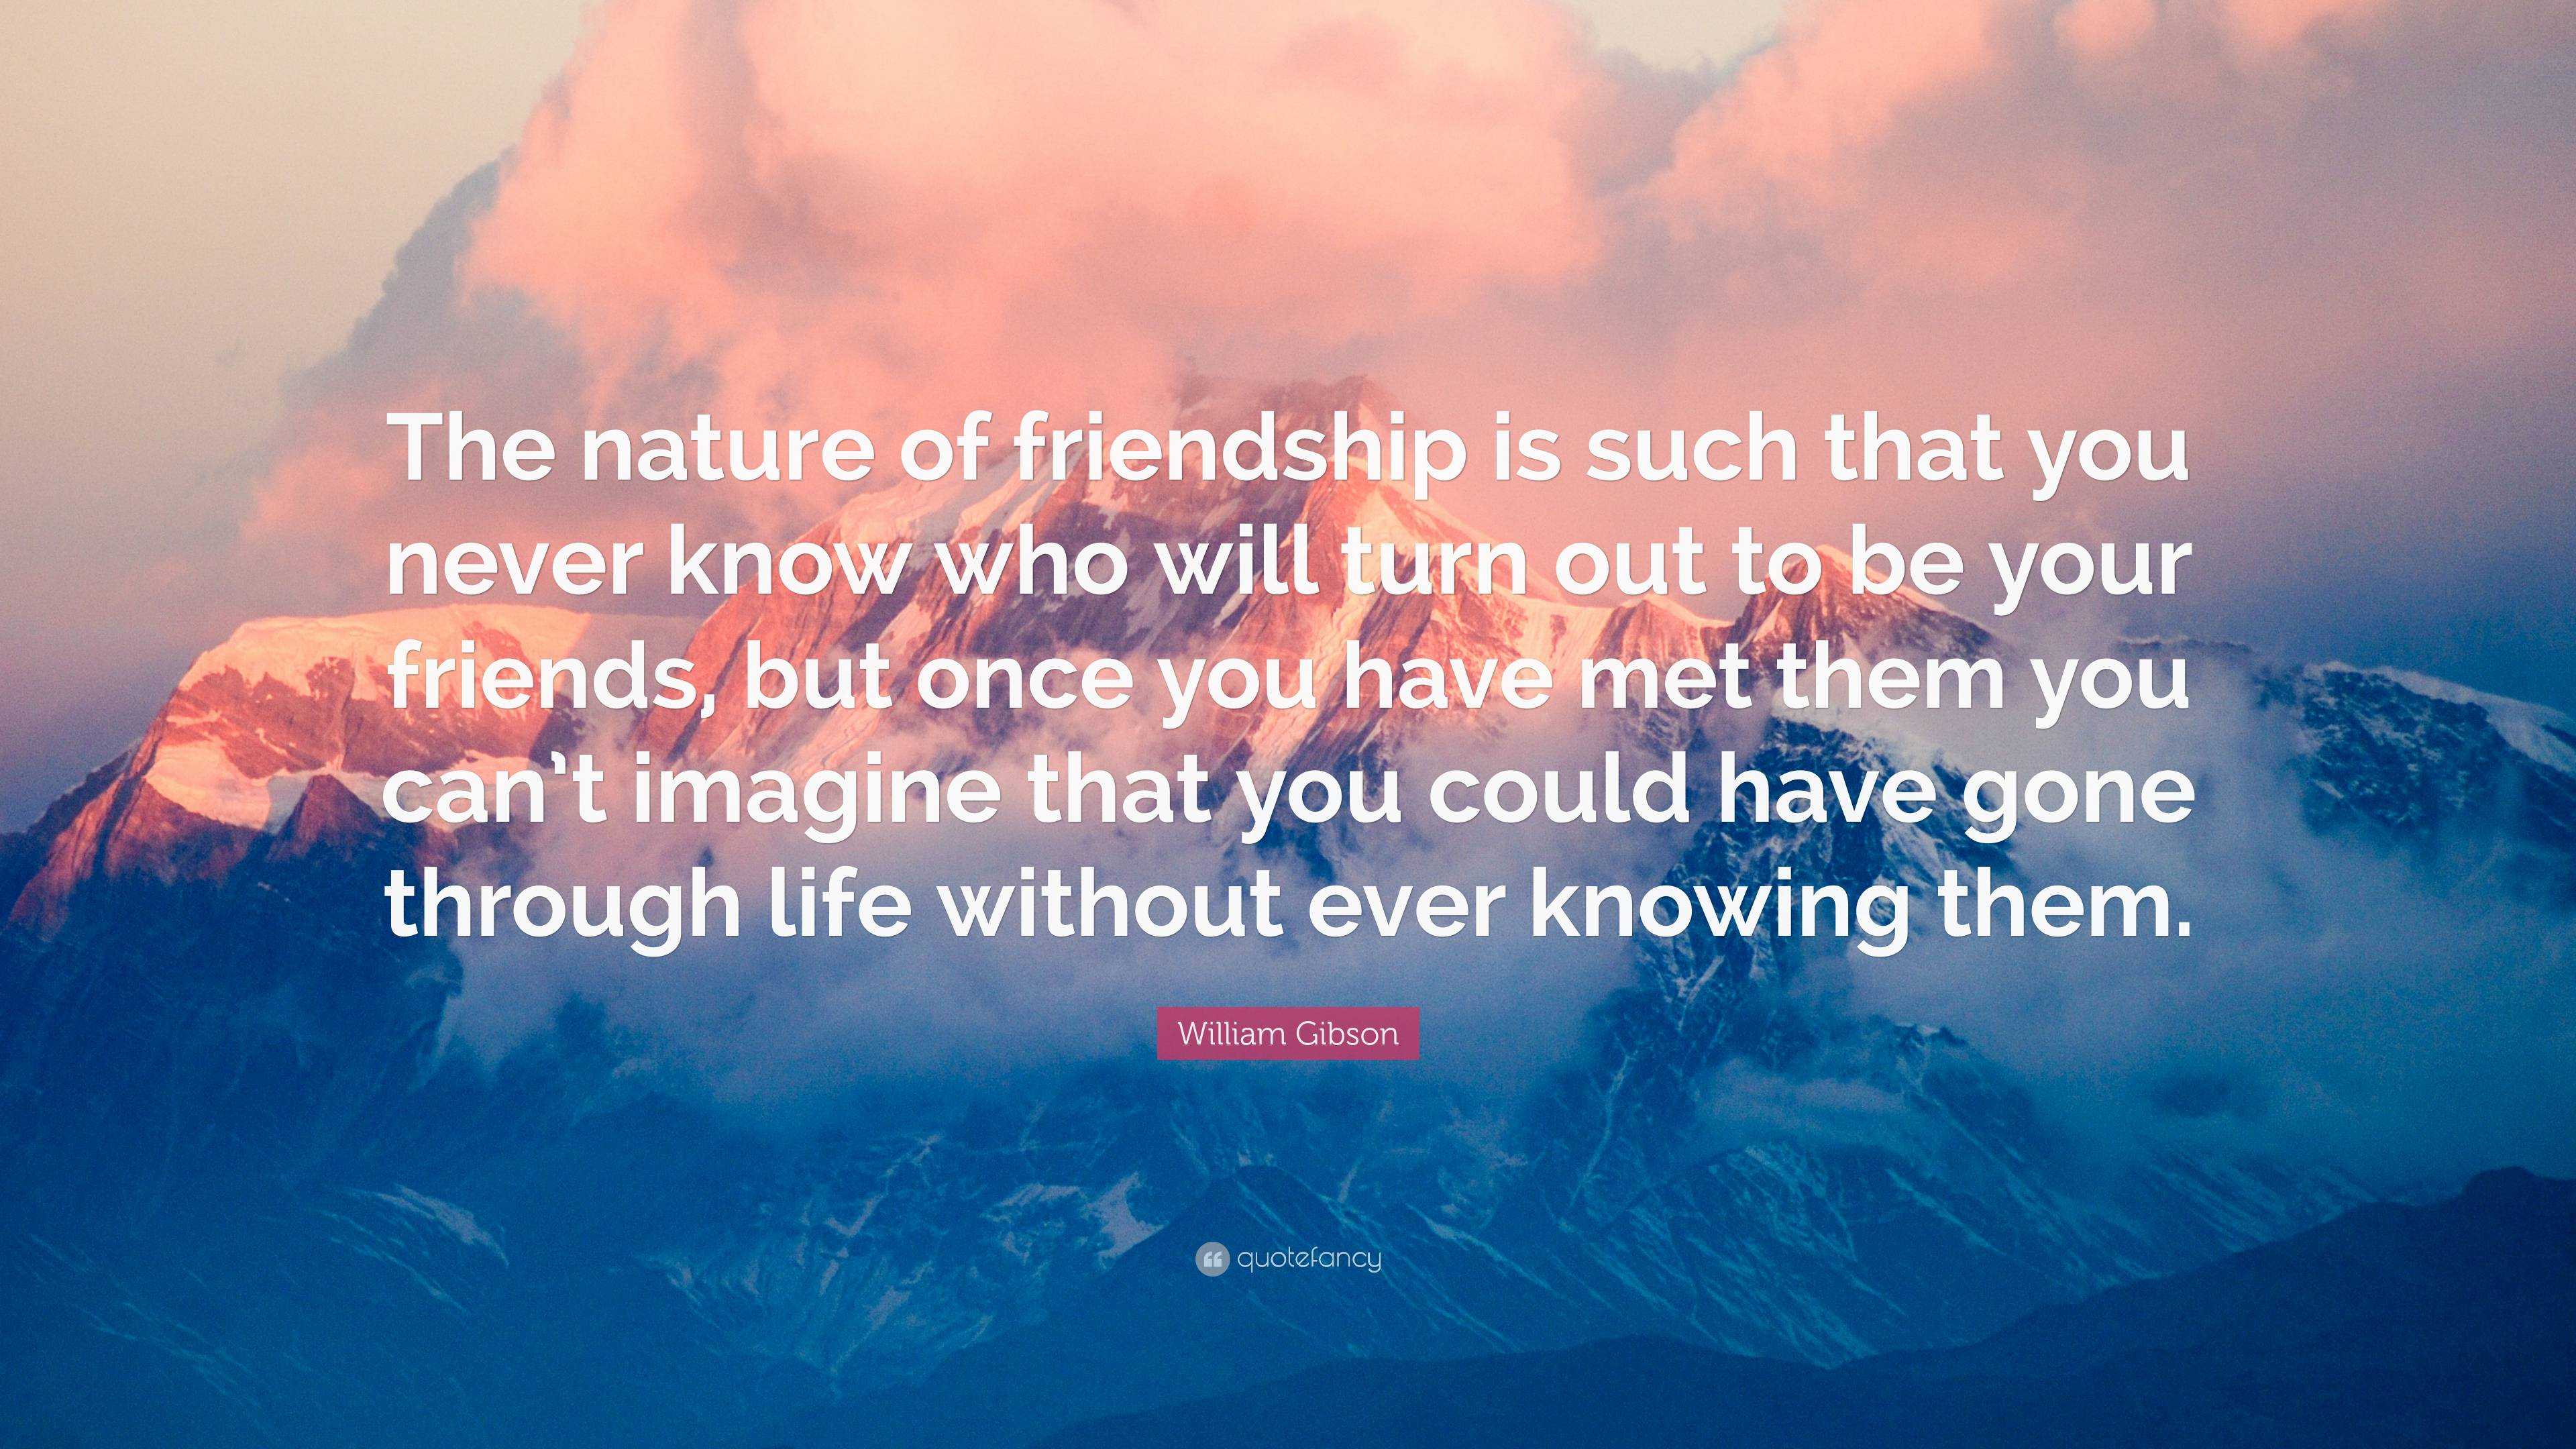 William Gibson Quote: “The nature of friendship is such that you never ...